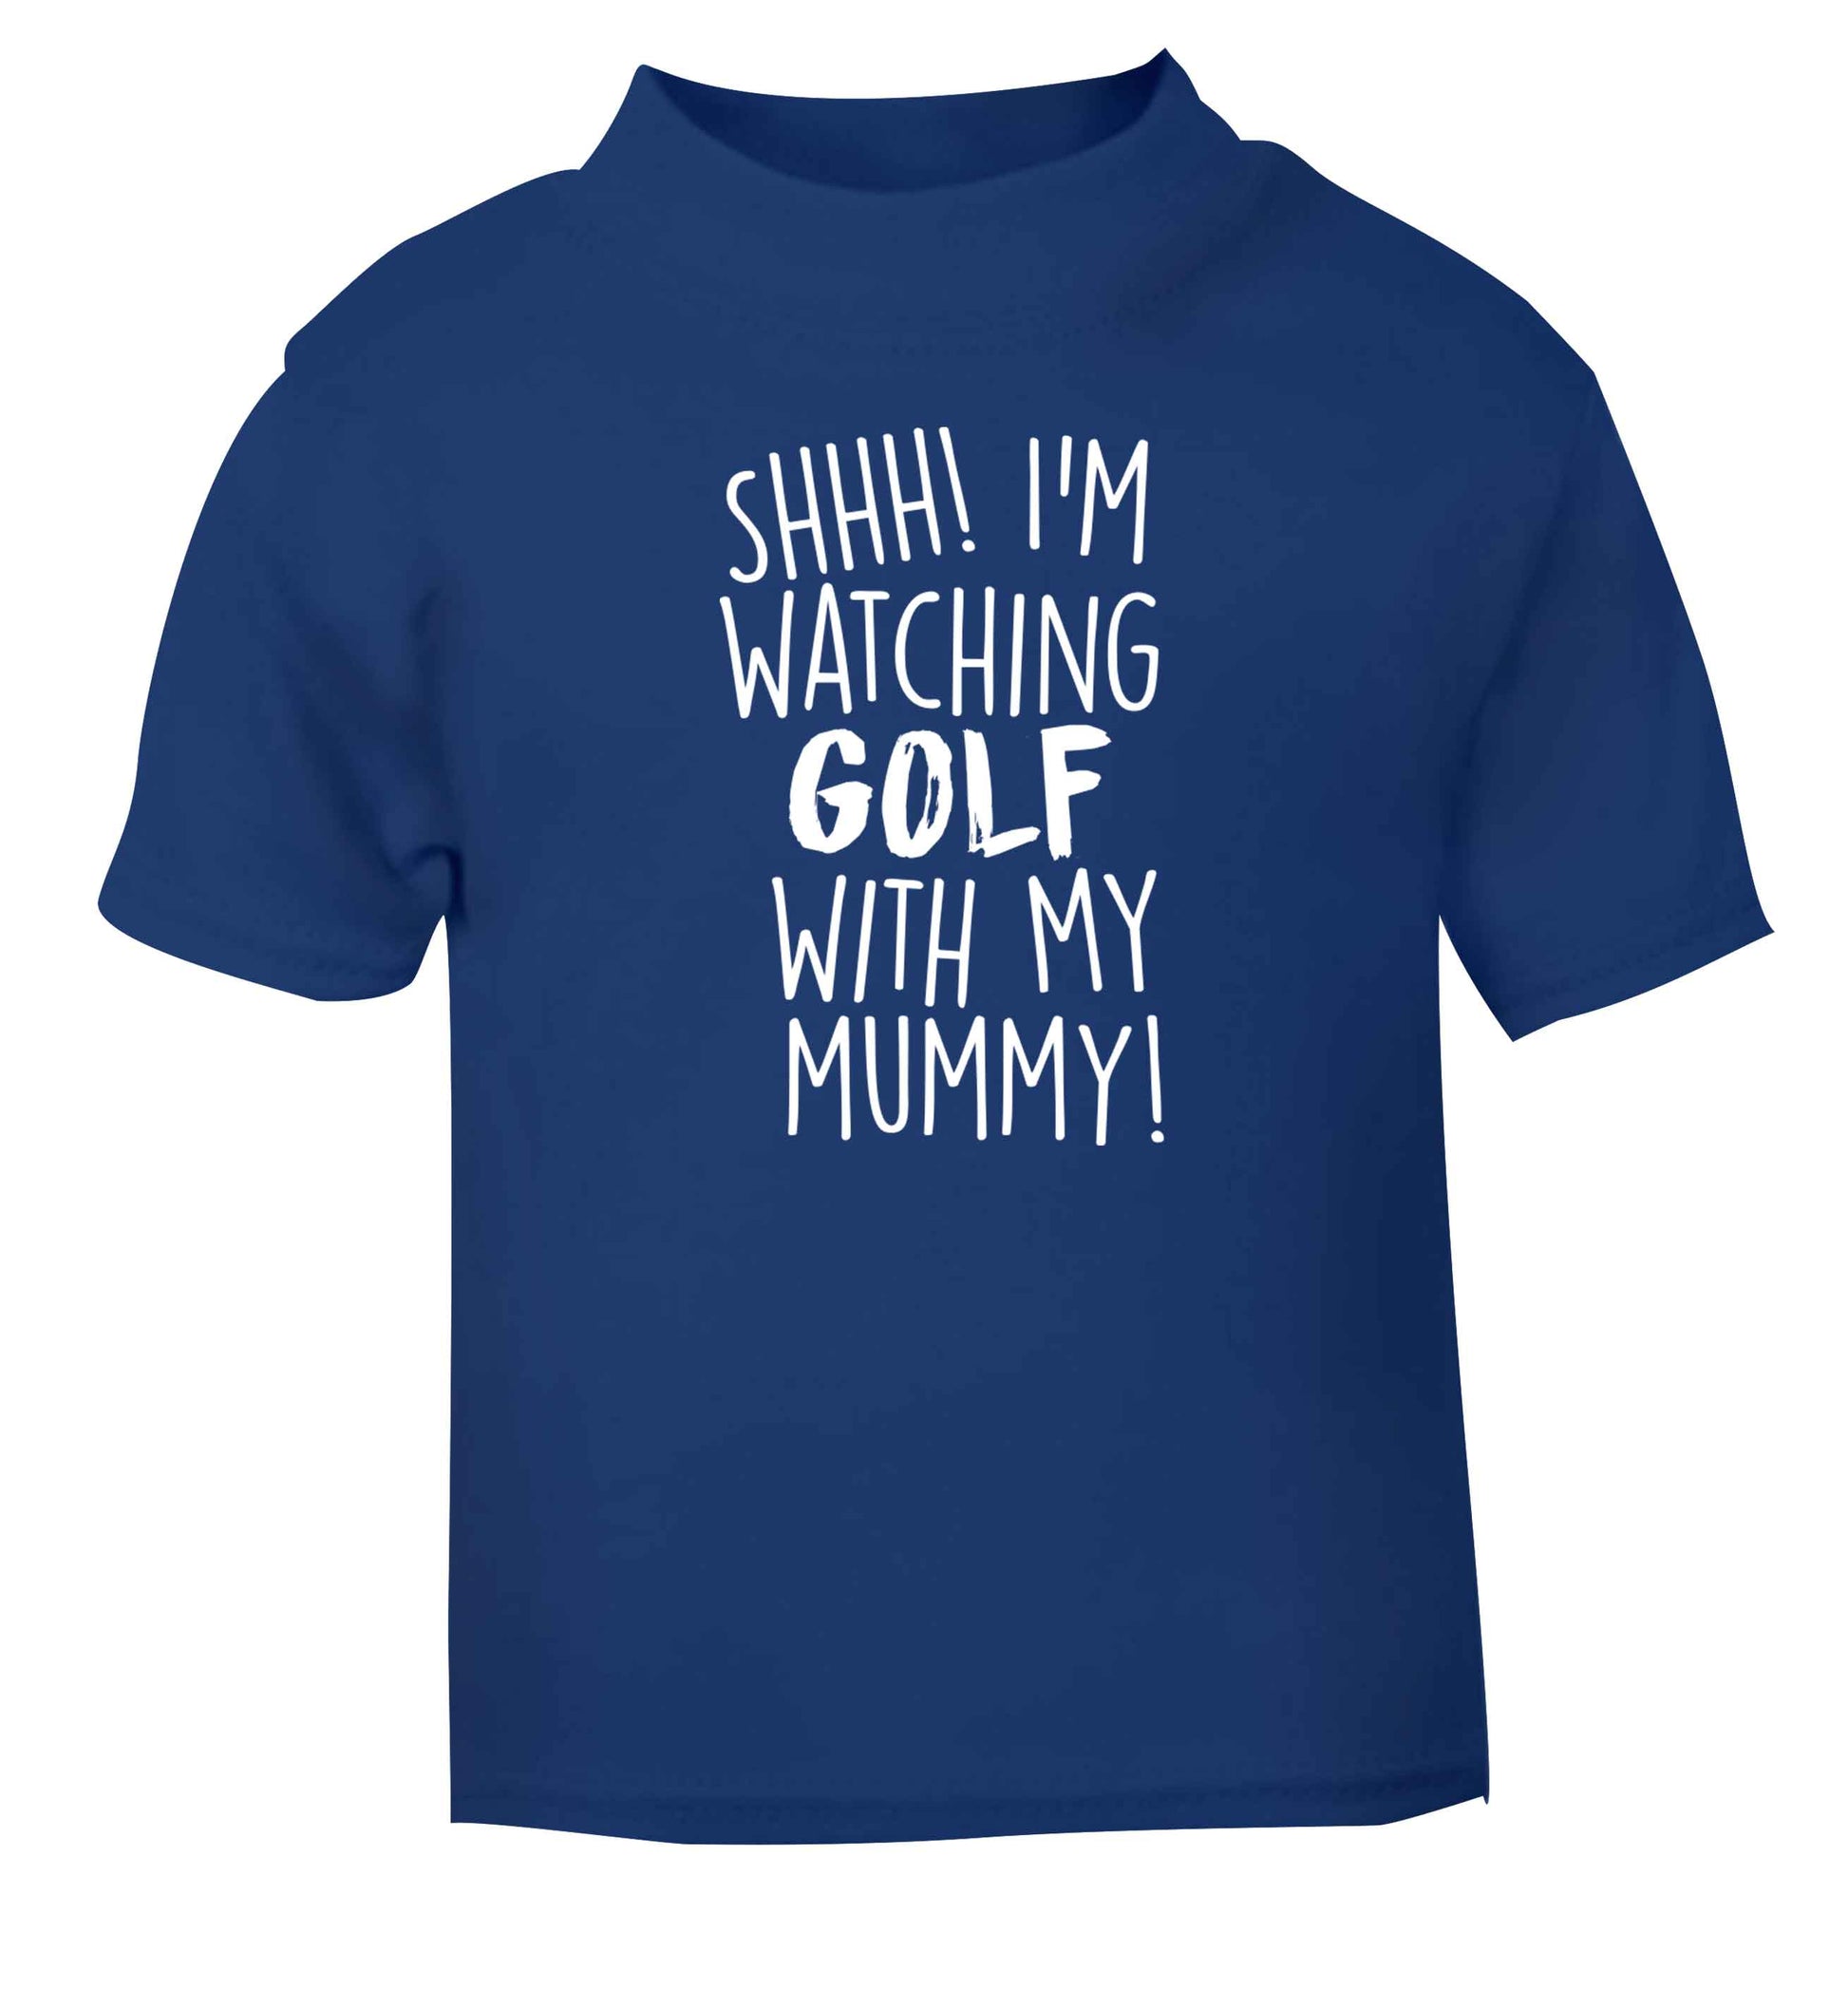 Shh I'm watching golf with my mummy blue Baby Toddler Tshirt 2 Years